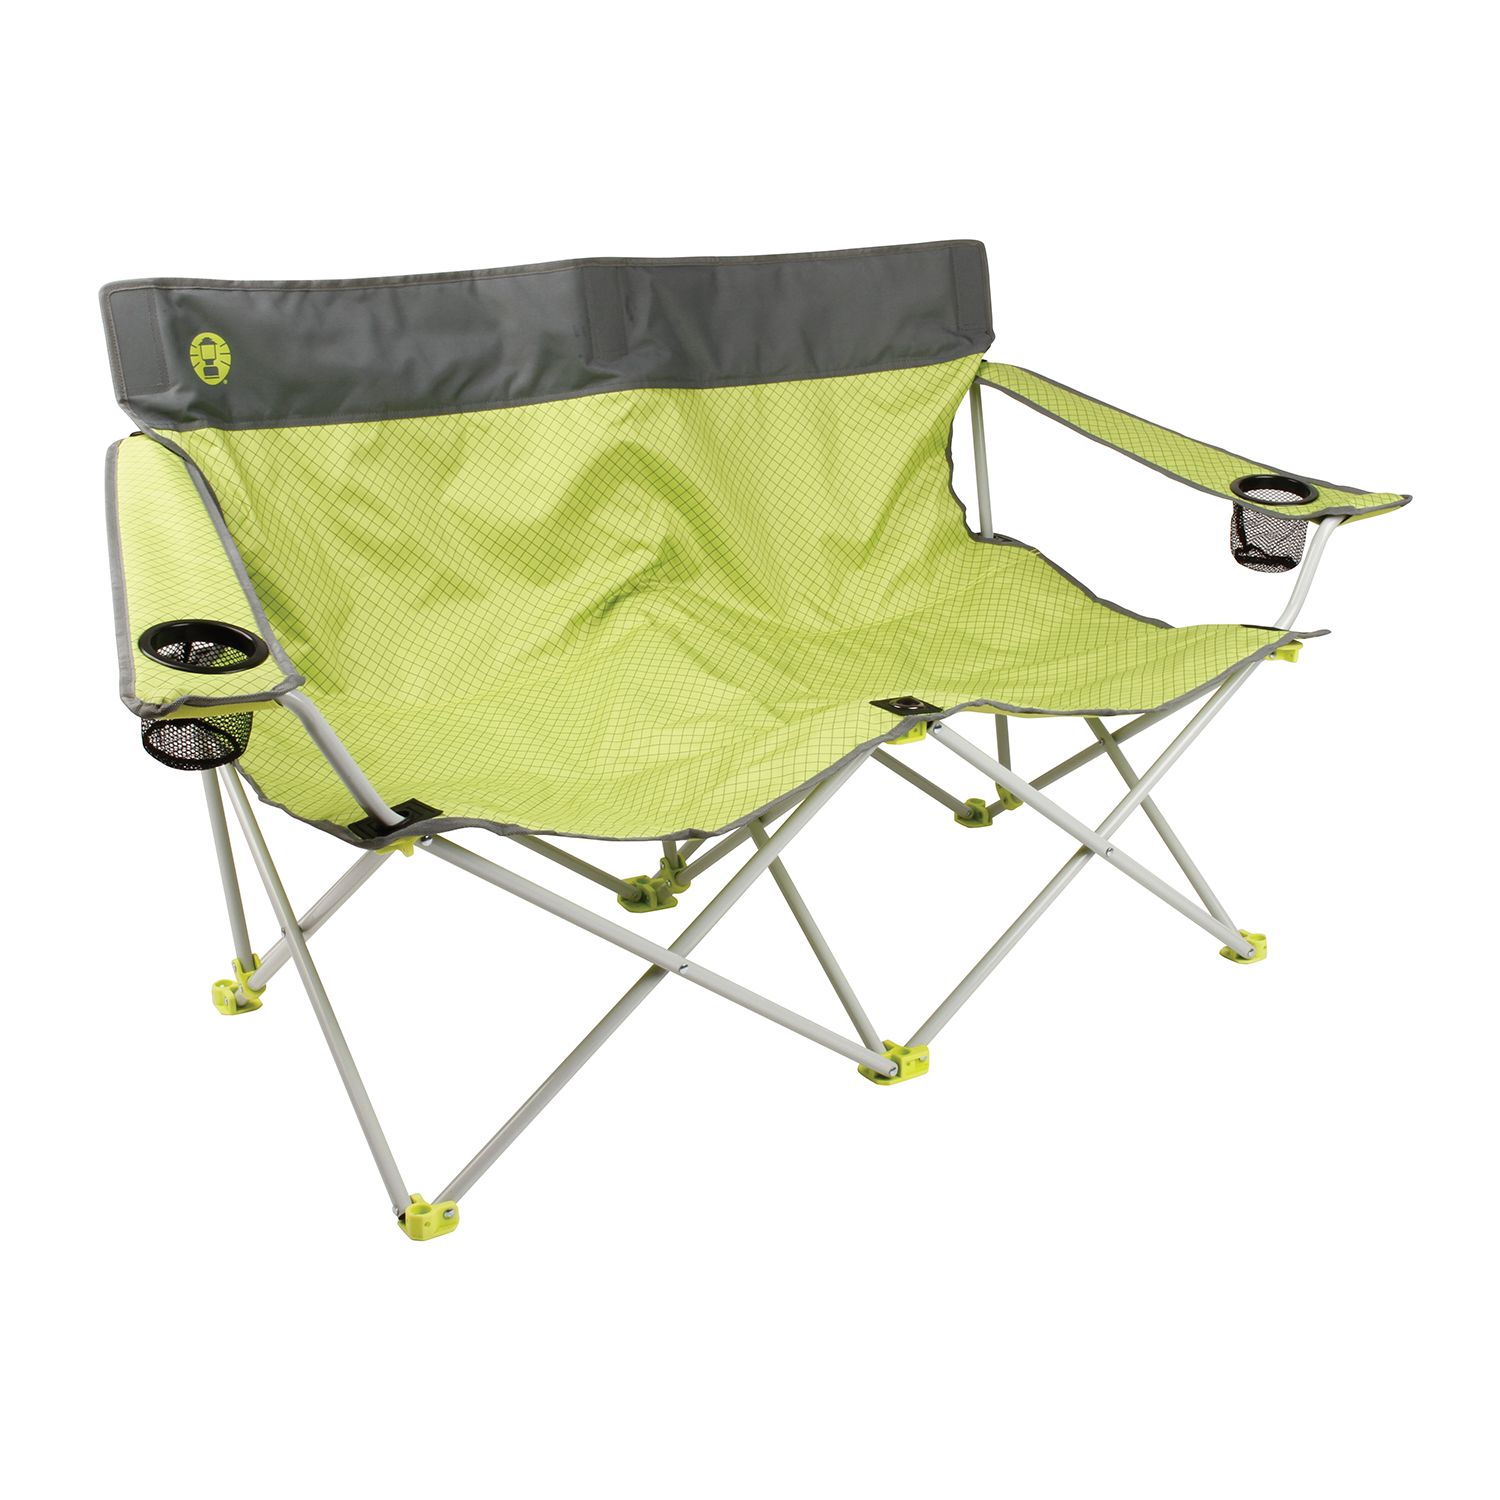 double seat camping chair